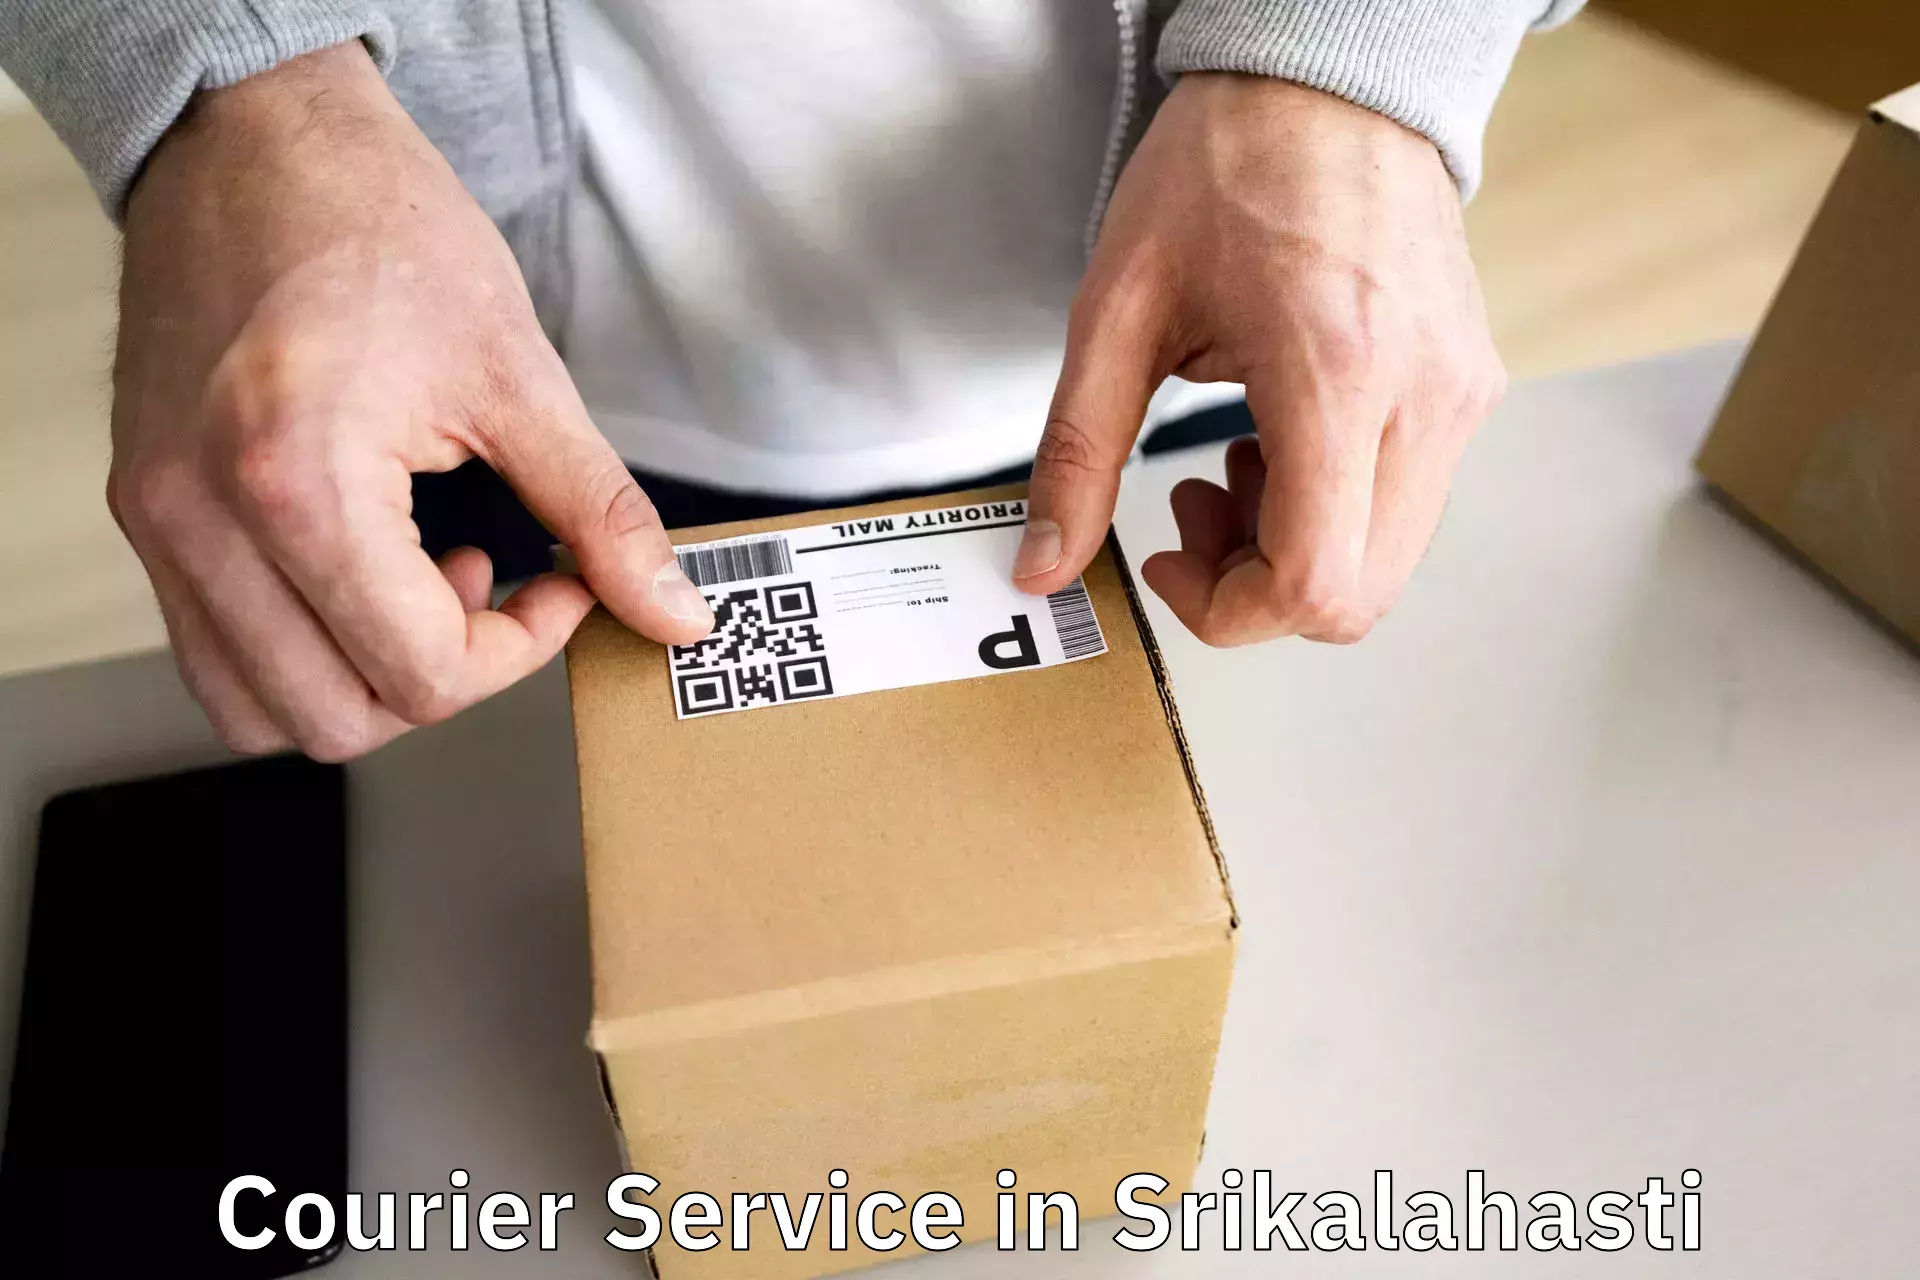 Specialized courier services in Srikalahasti